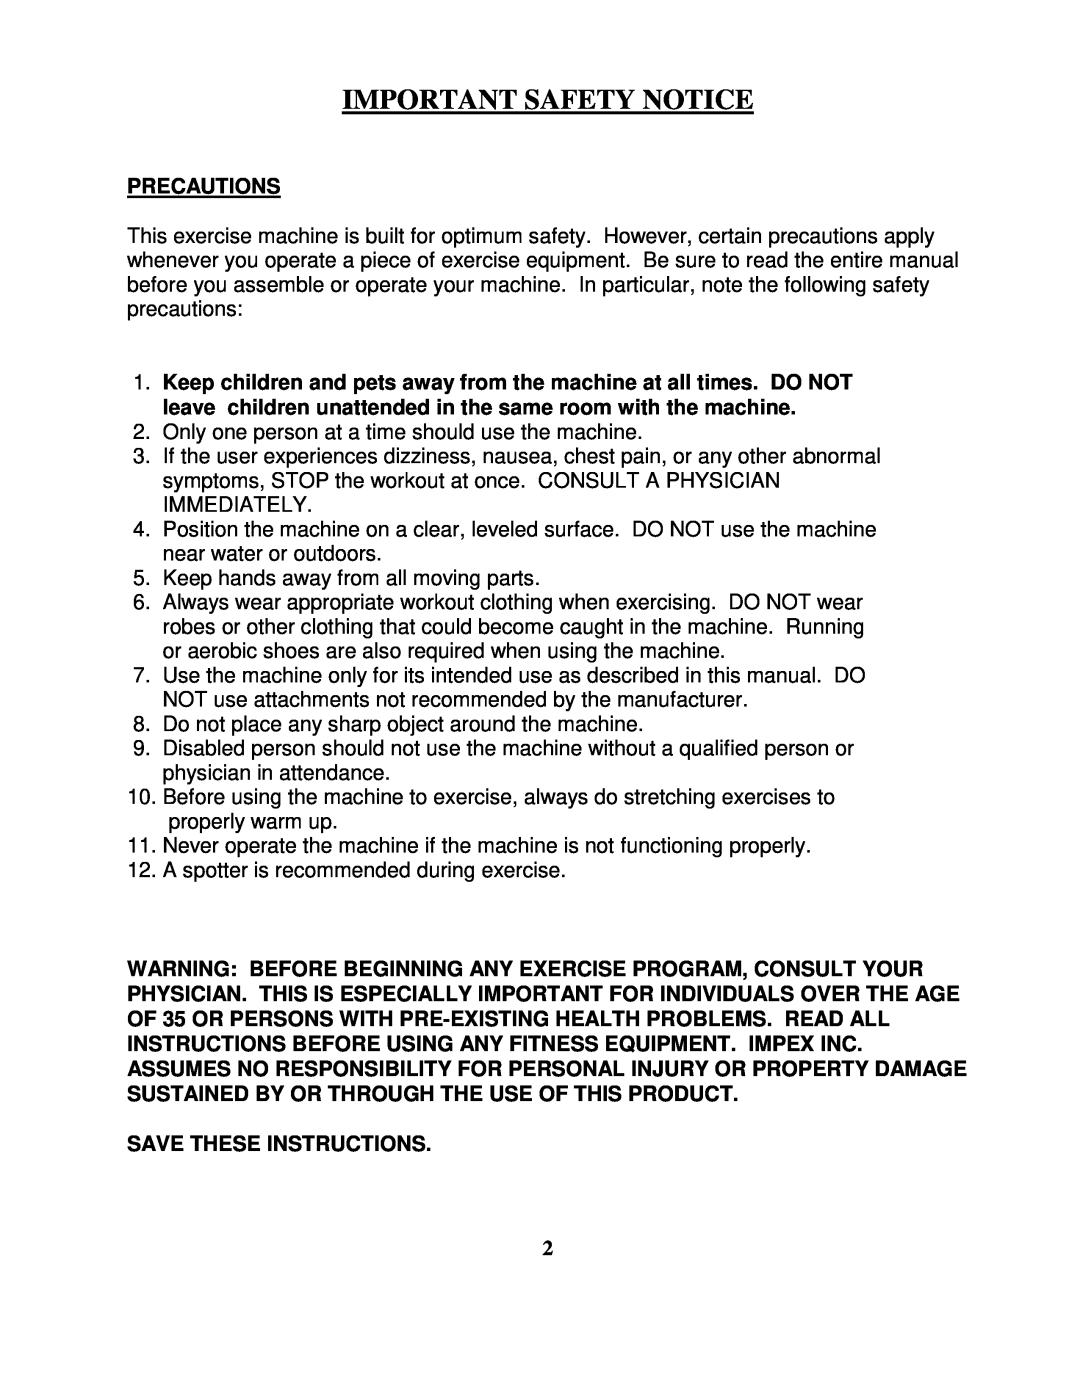 Impex CB-339 manual Important Safety Notice, Precautions, Save These Instructions 